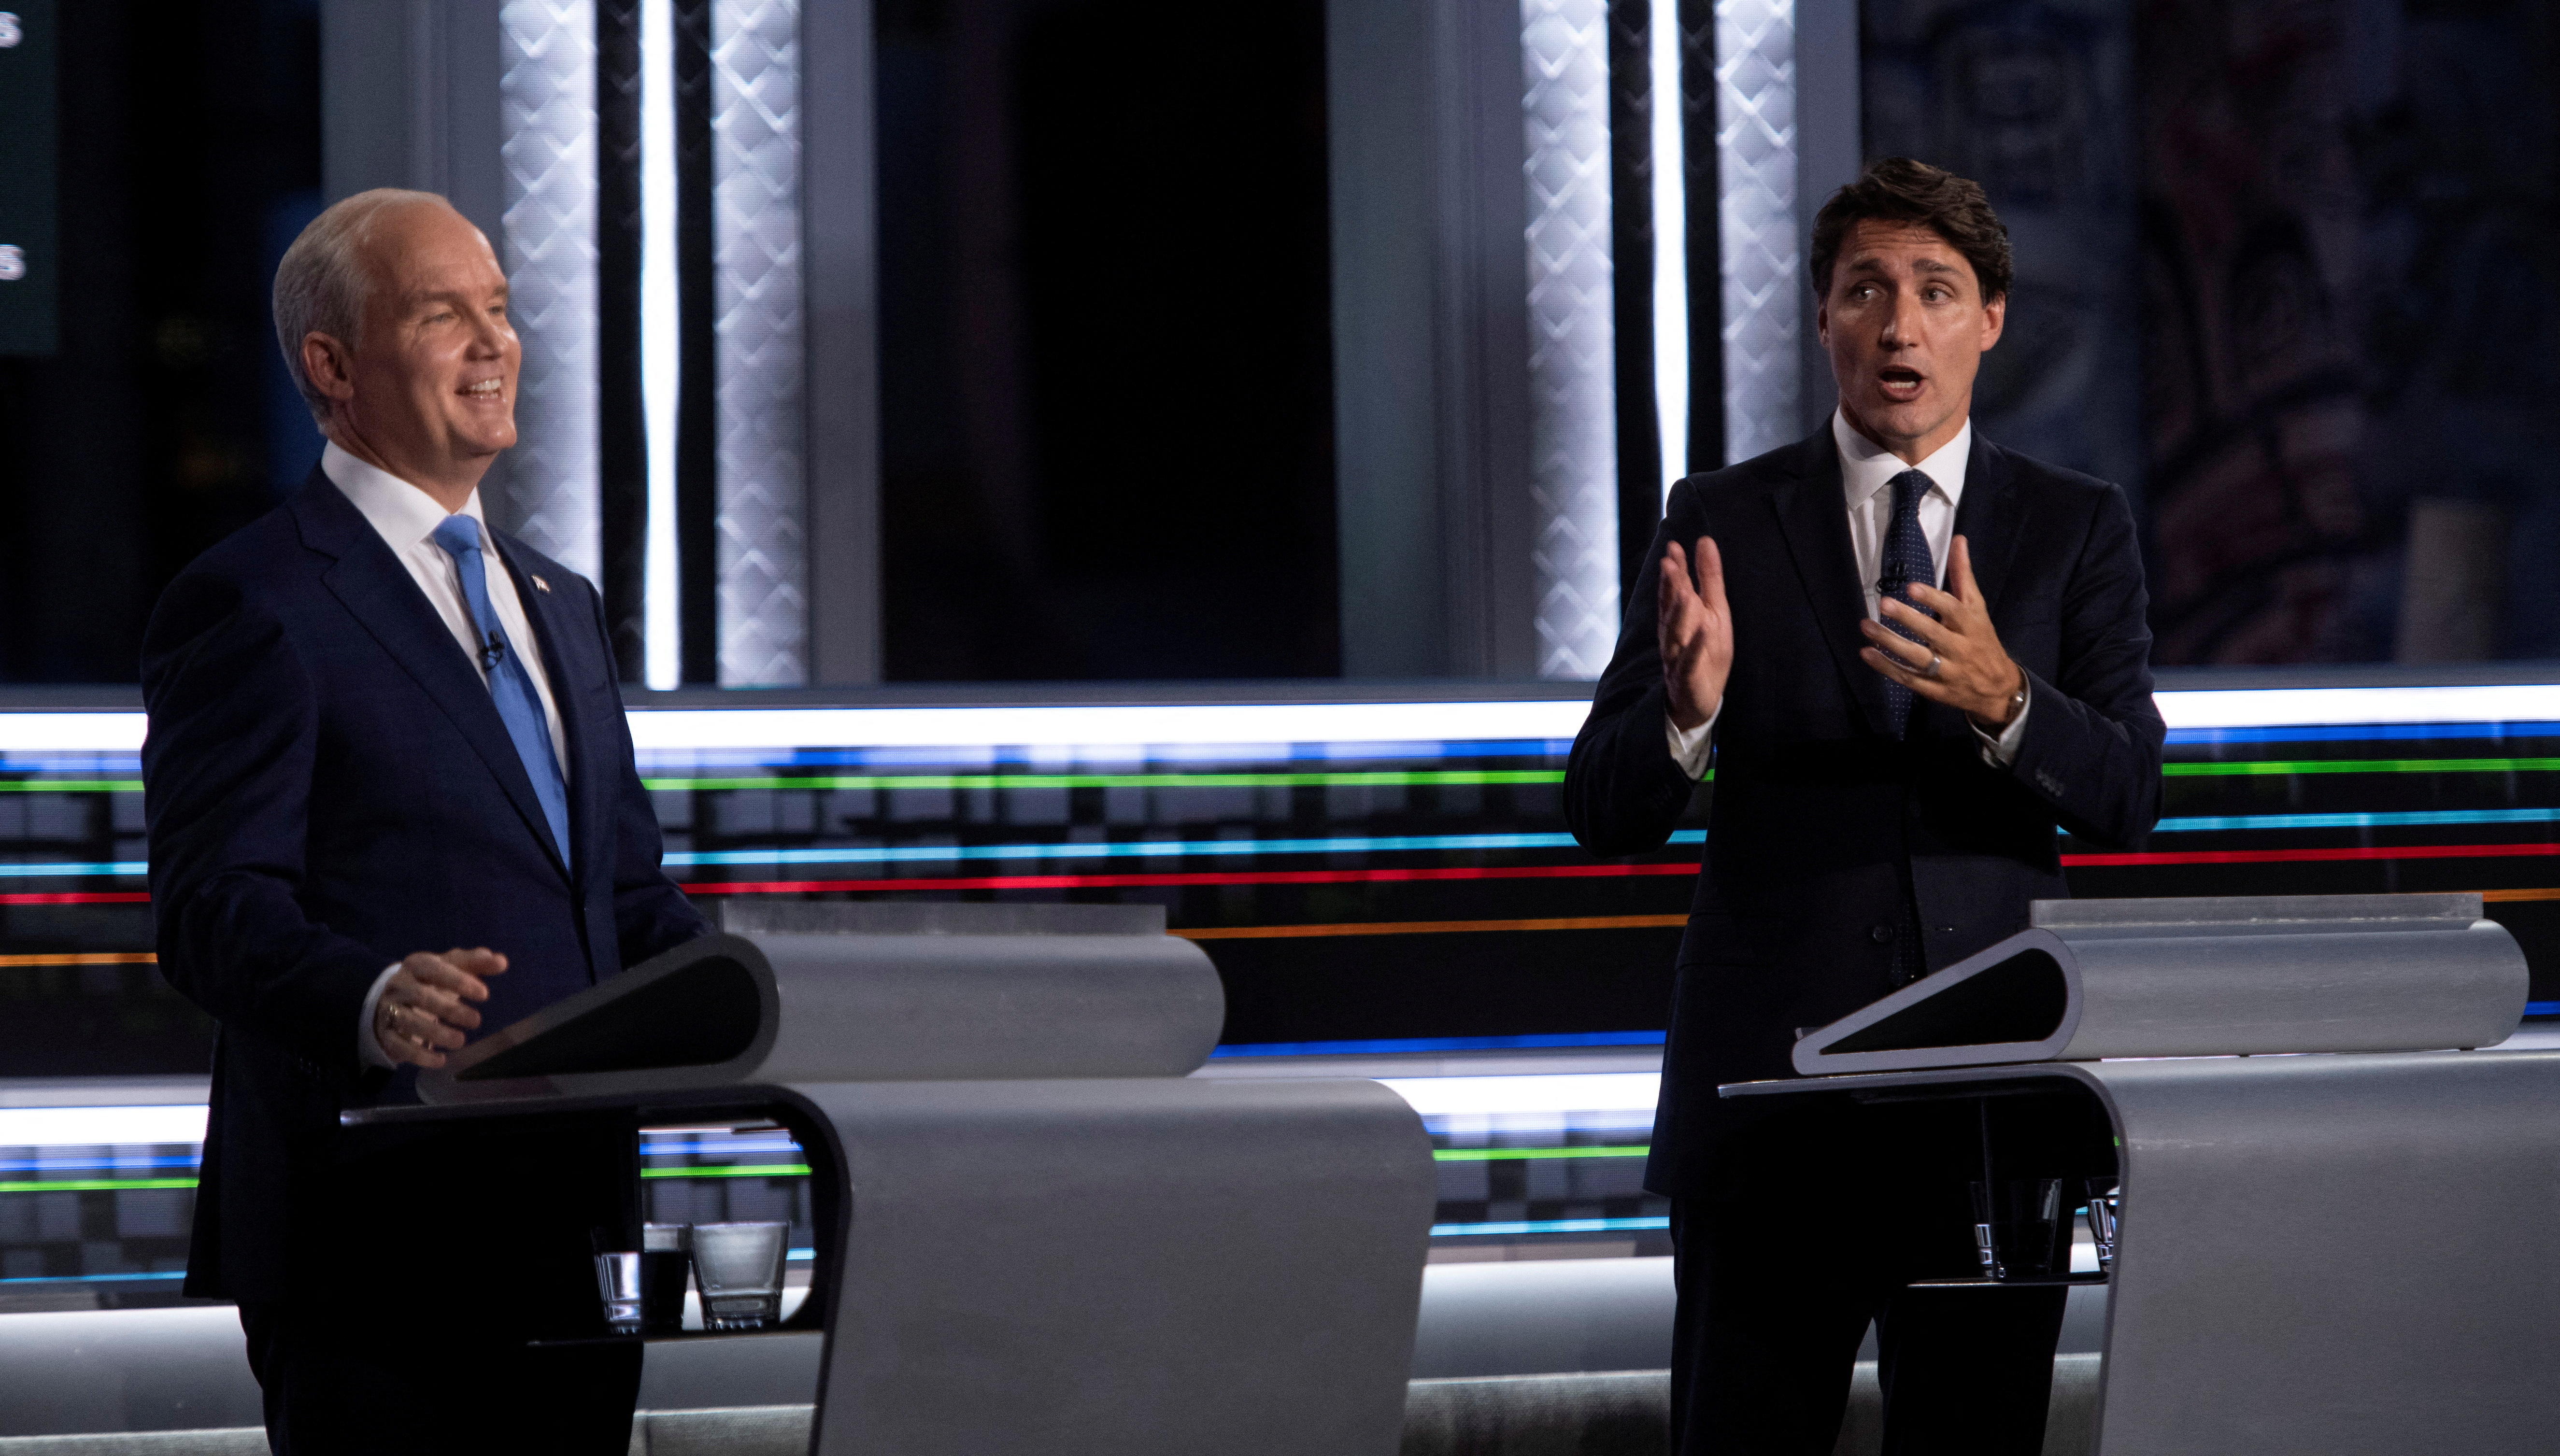 Canadian political party leaders hold an election campaign debate, in Quebec